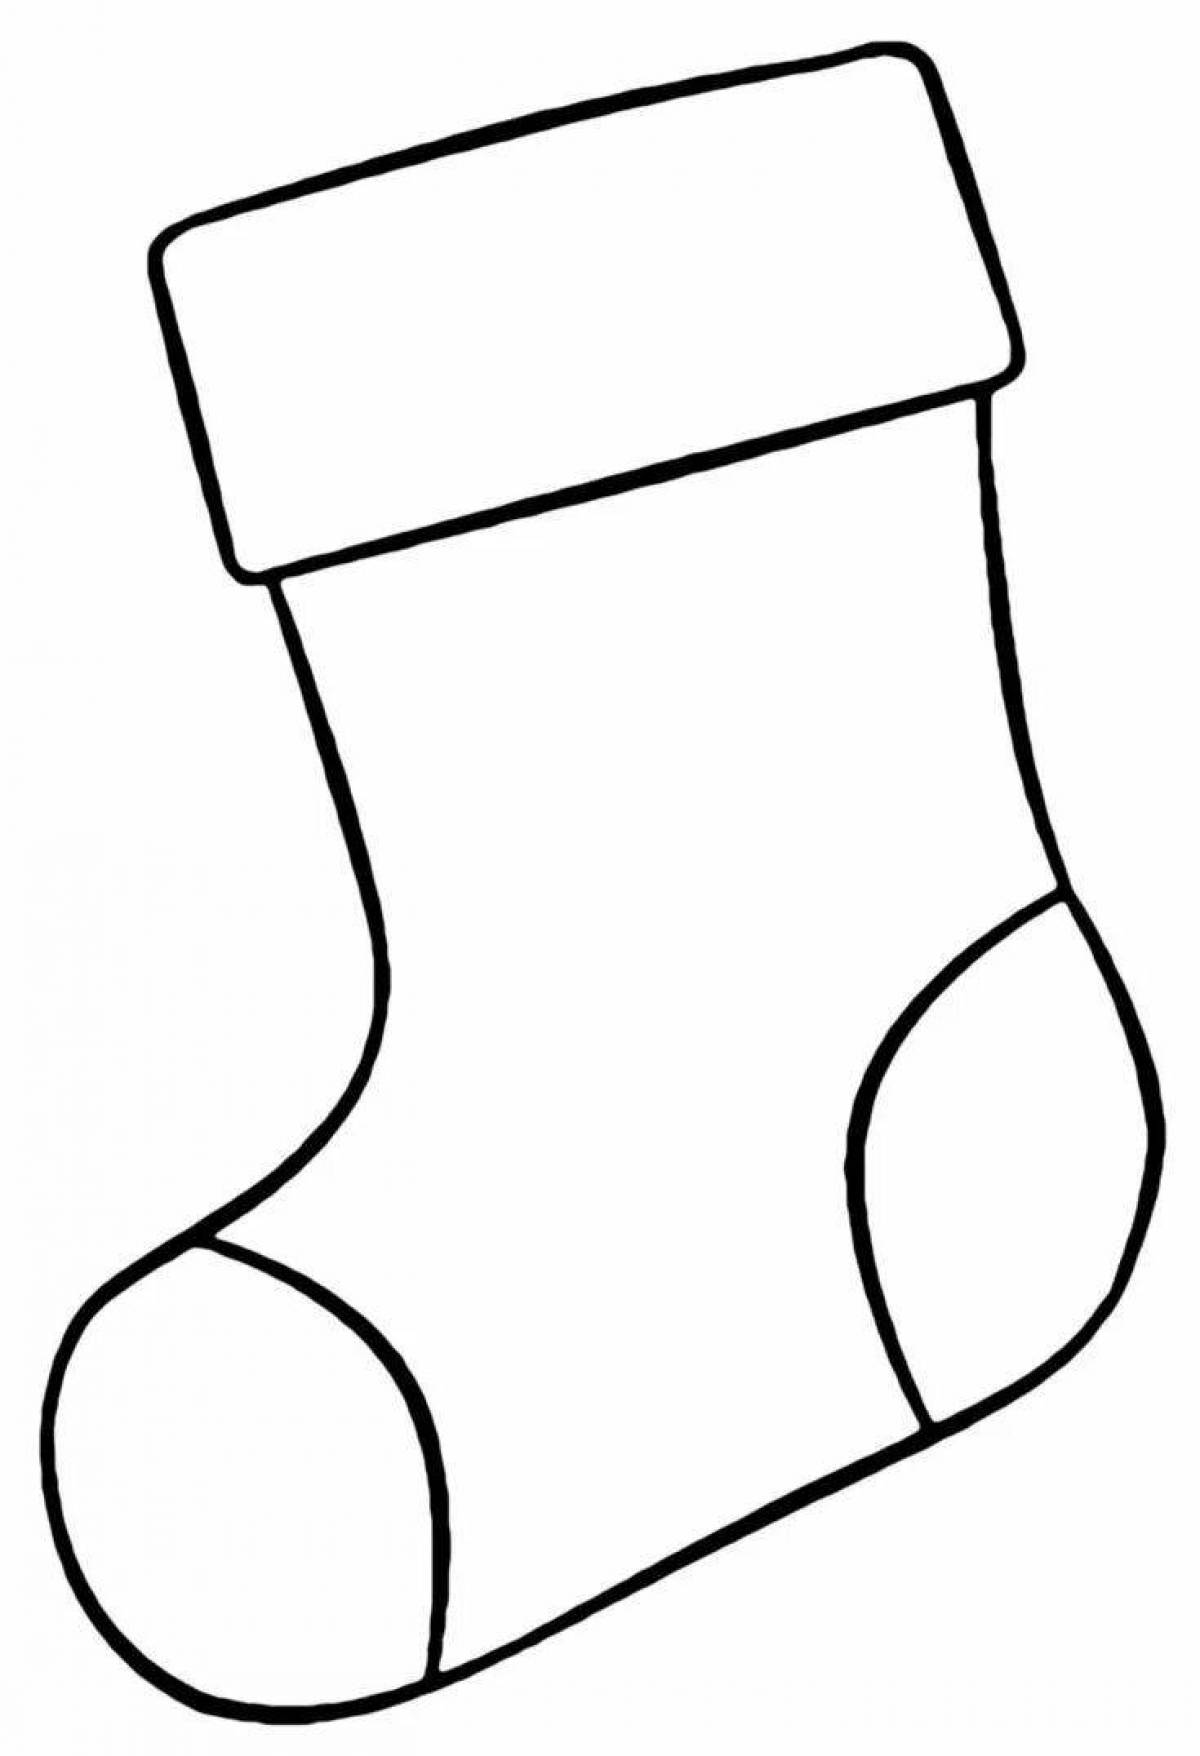 Coloring book sparkling Christmas boot